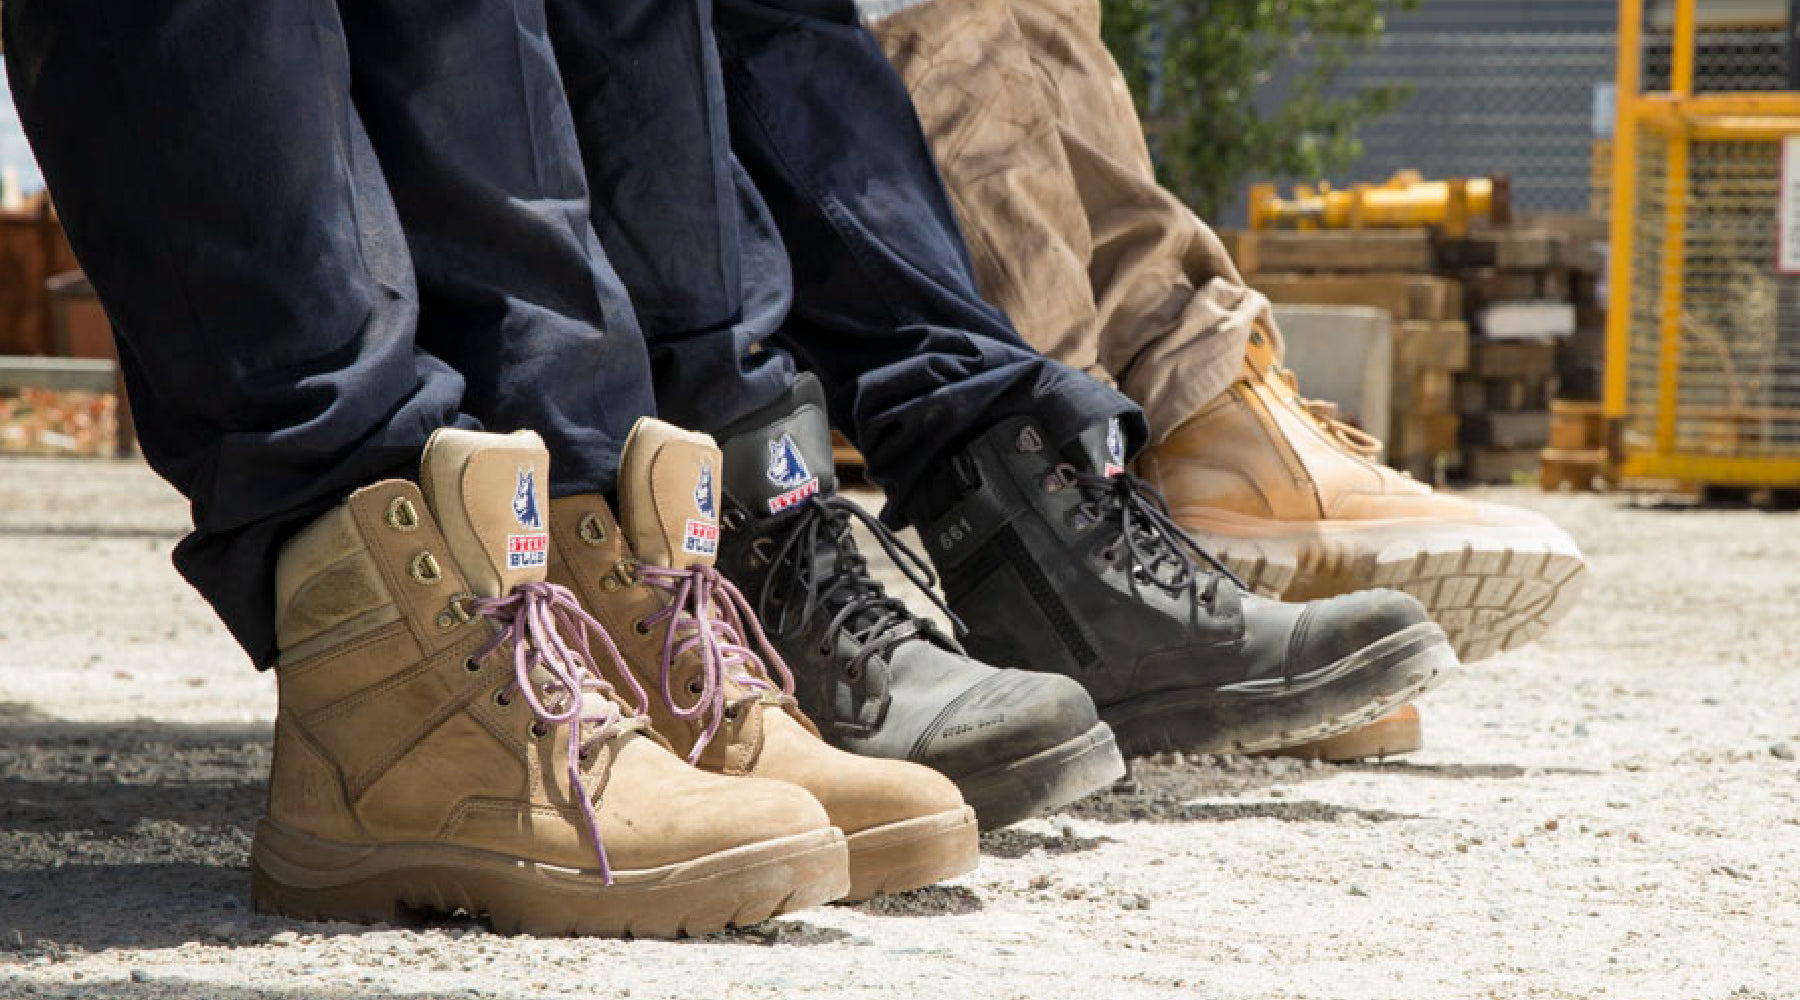 How to Choose the Best Safety Workboots for Long Days on the Job